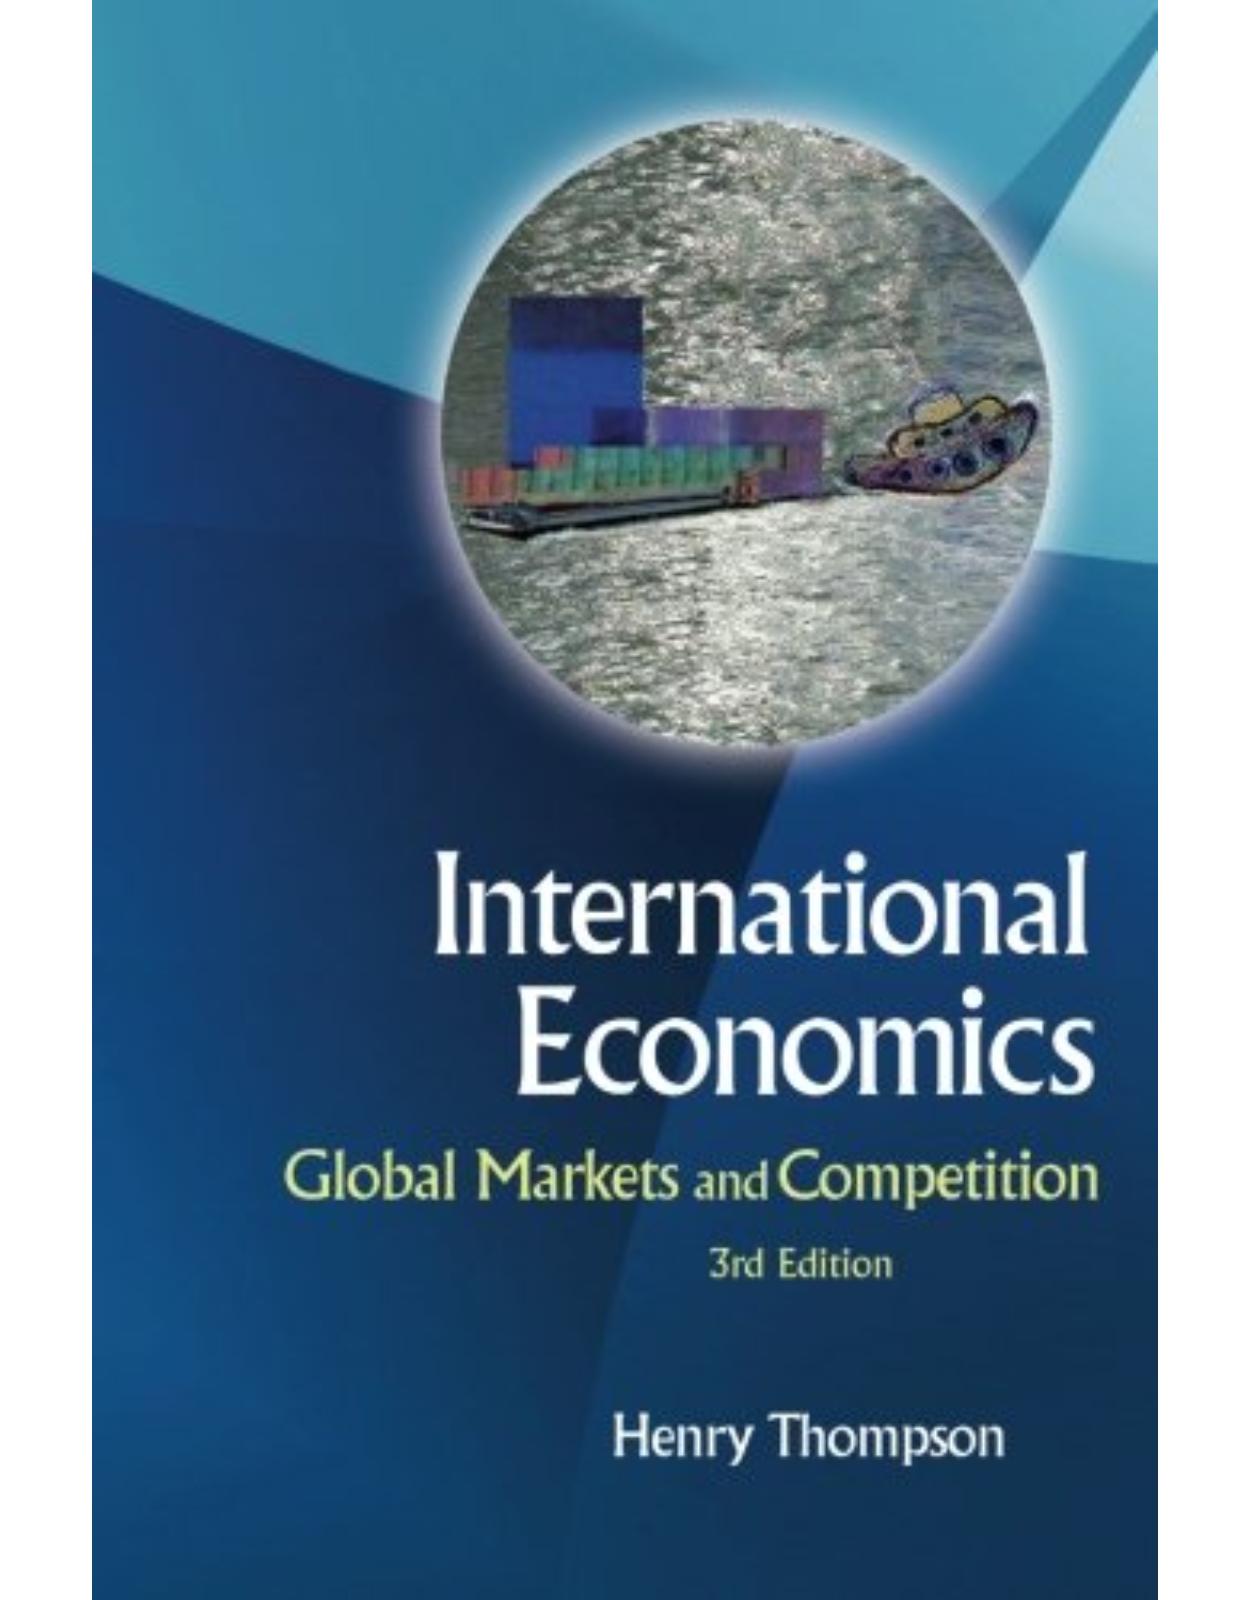 International Economics: Global Markets And Competition (3Rd Edition) 